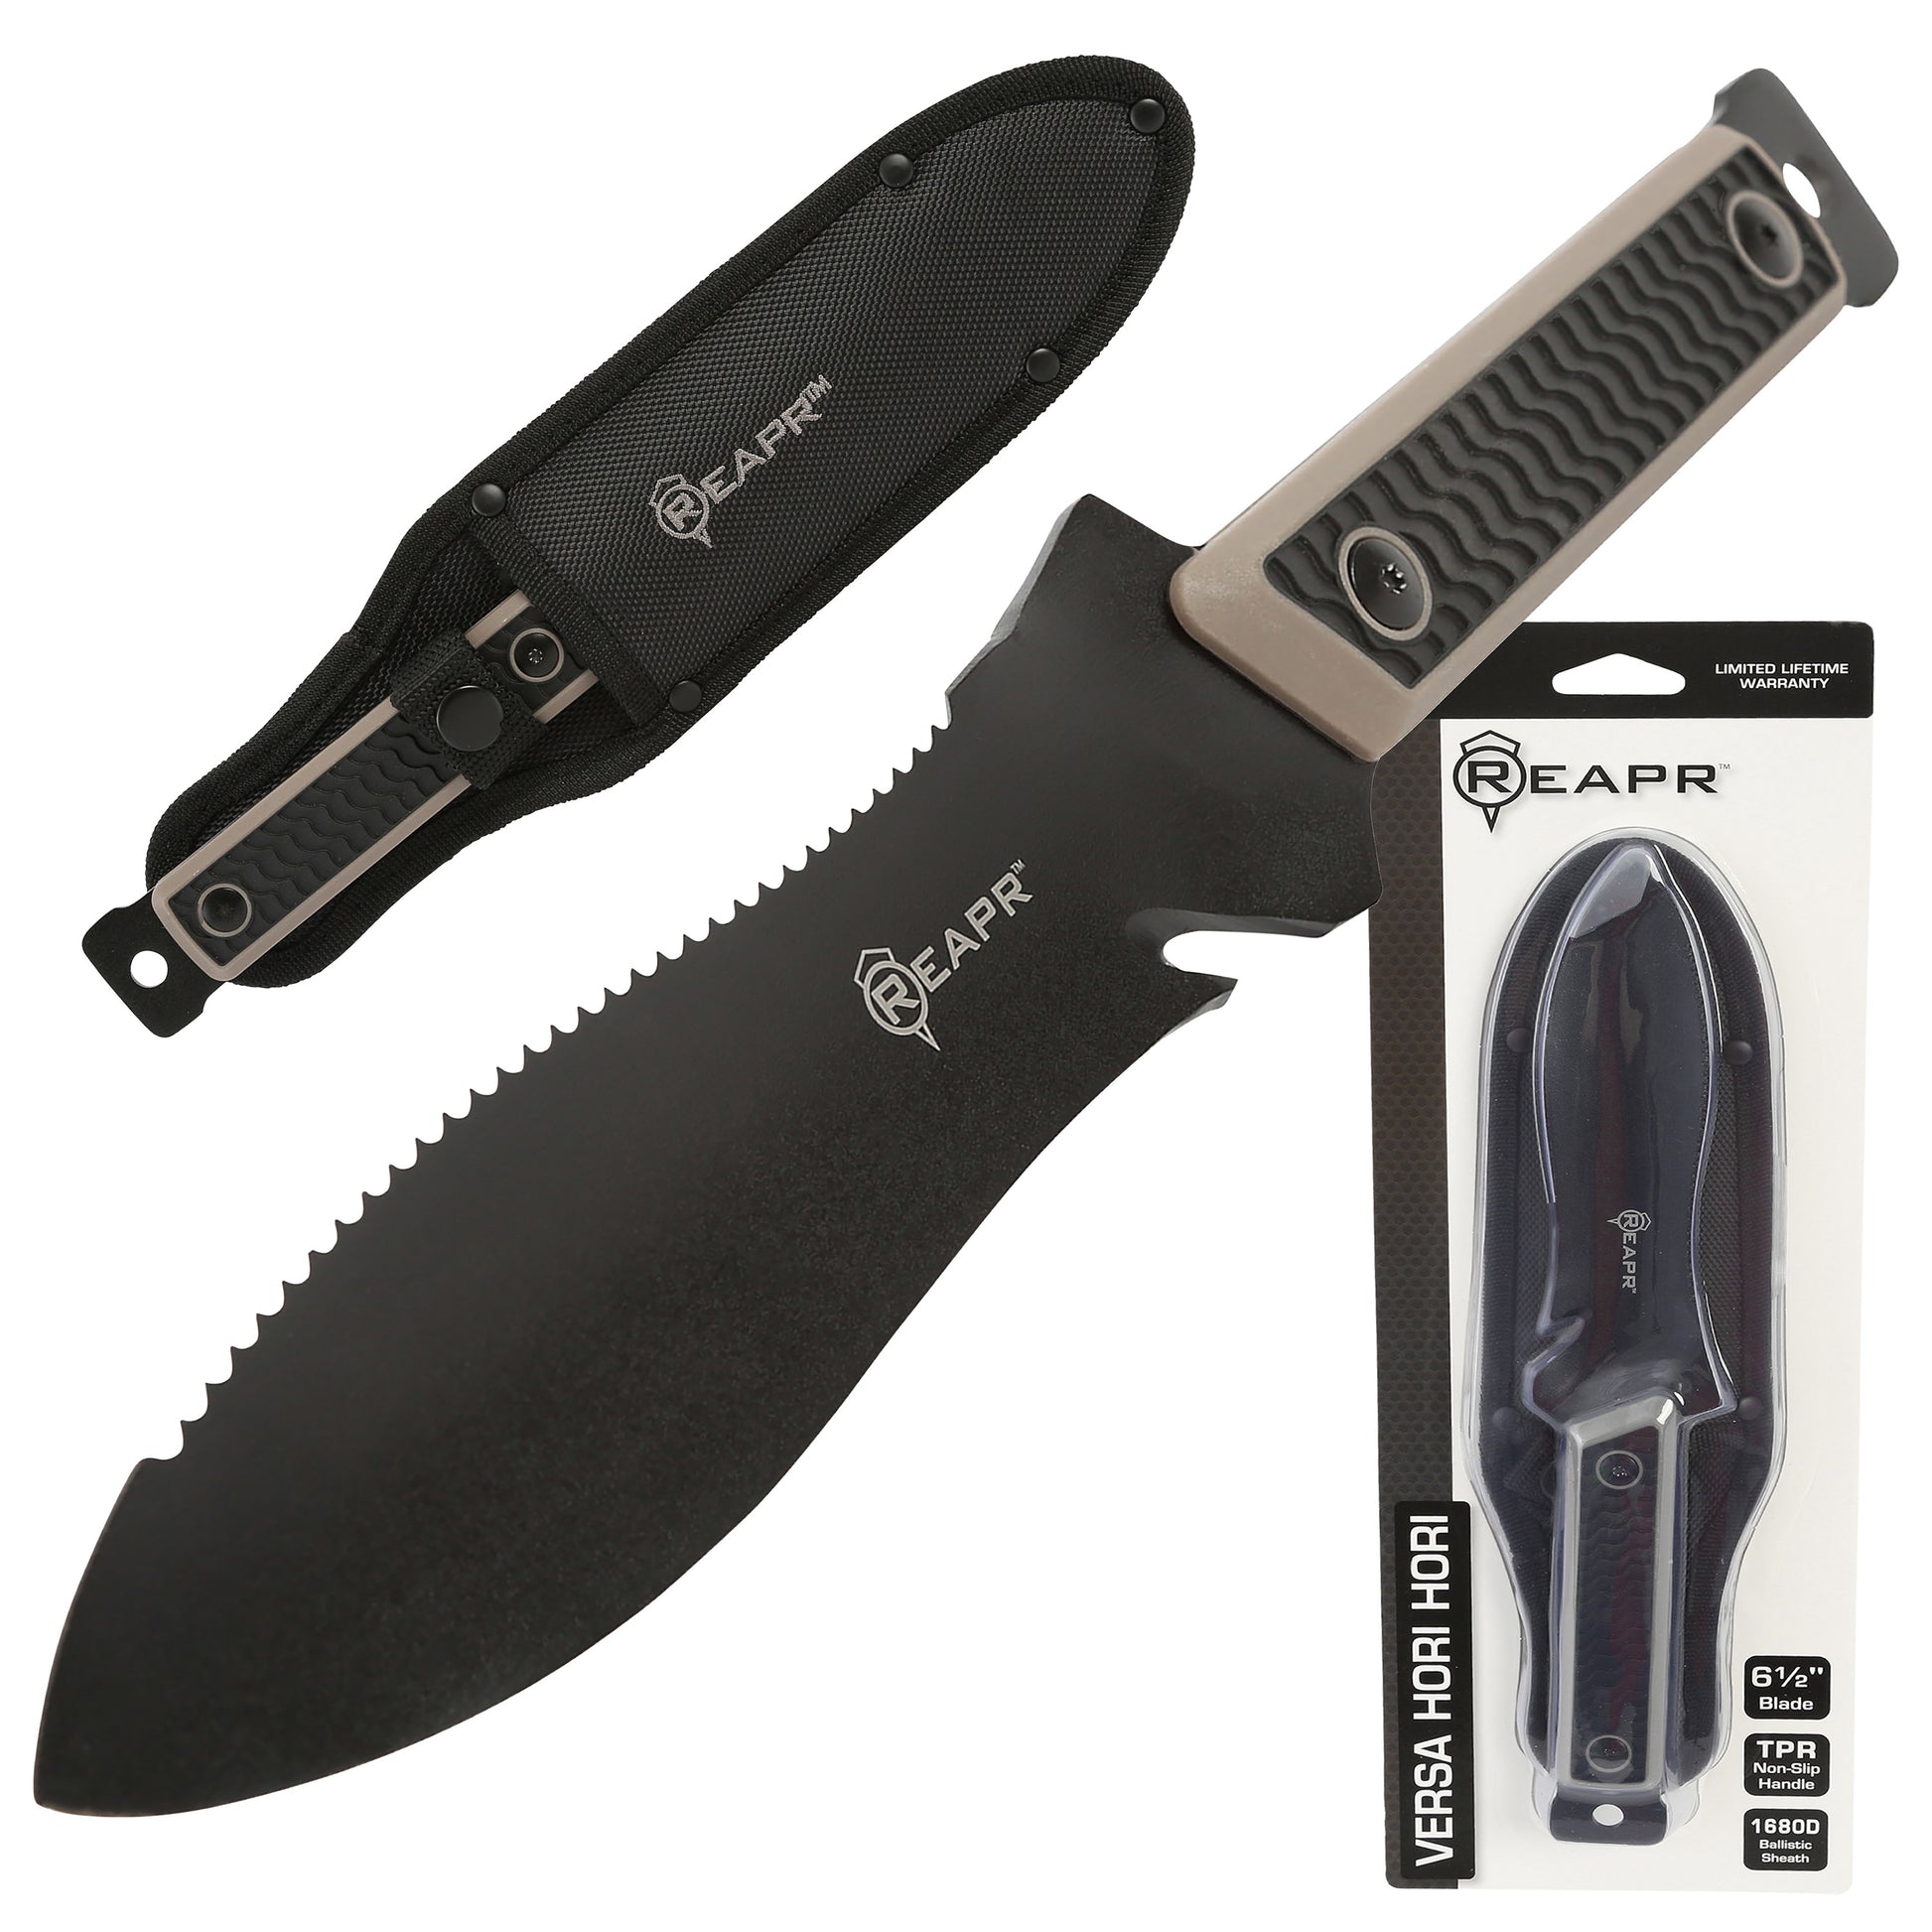 REAPR 11017 Versa Hori Hori- a gardening knife, trowel, pocket tactical shovel and all round survival knife in one.